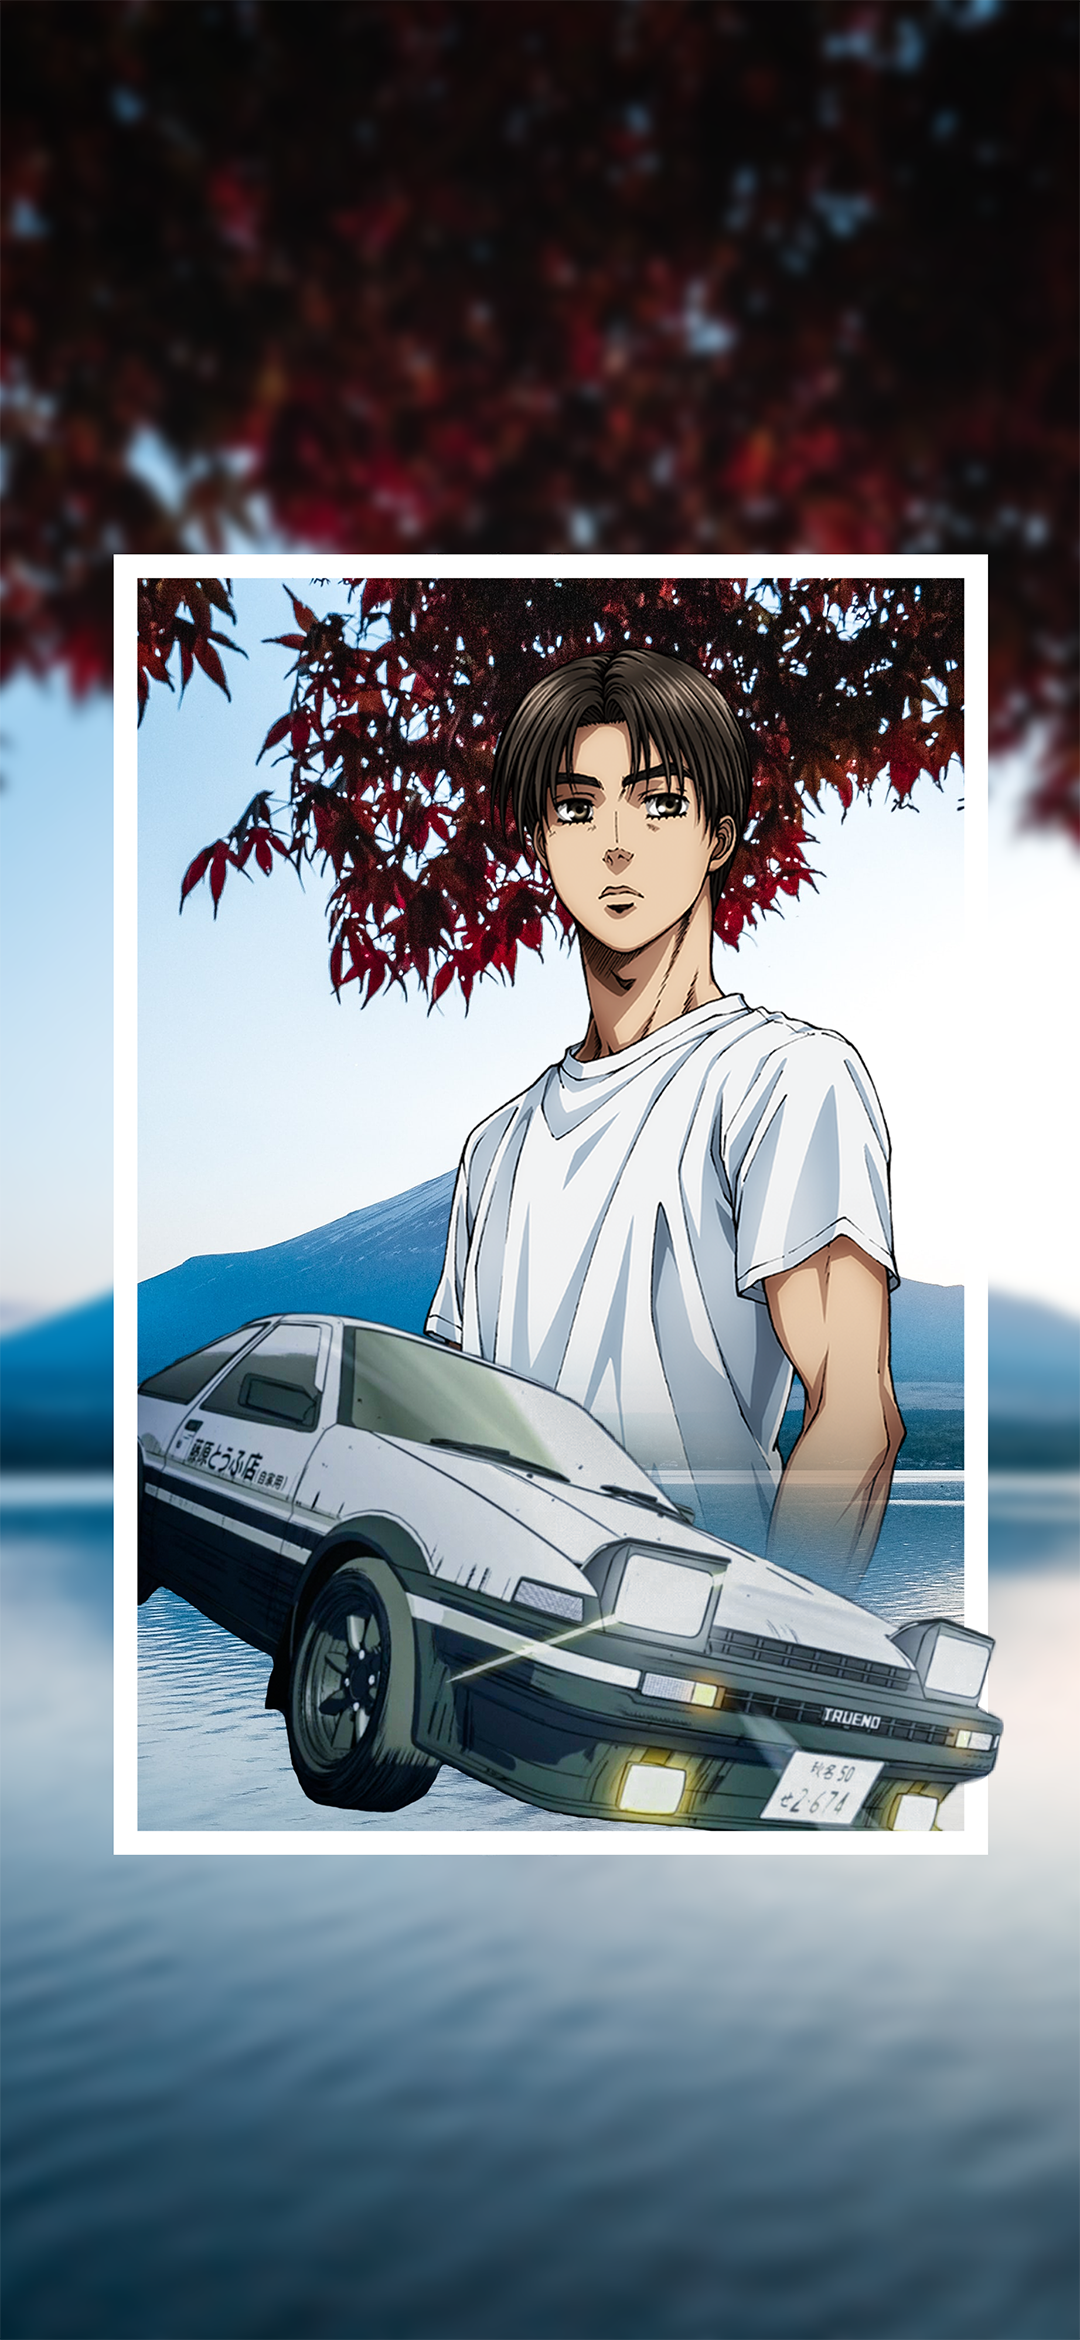 Anime Initial D Mobile Abyss